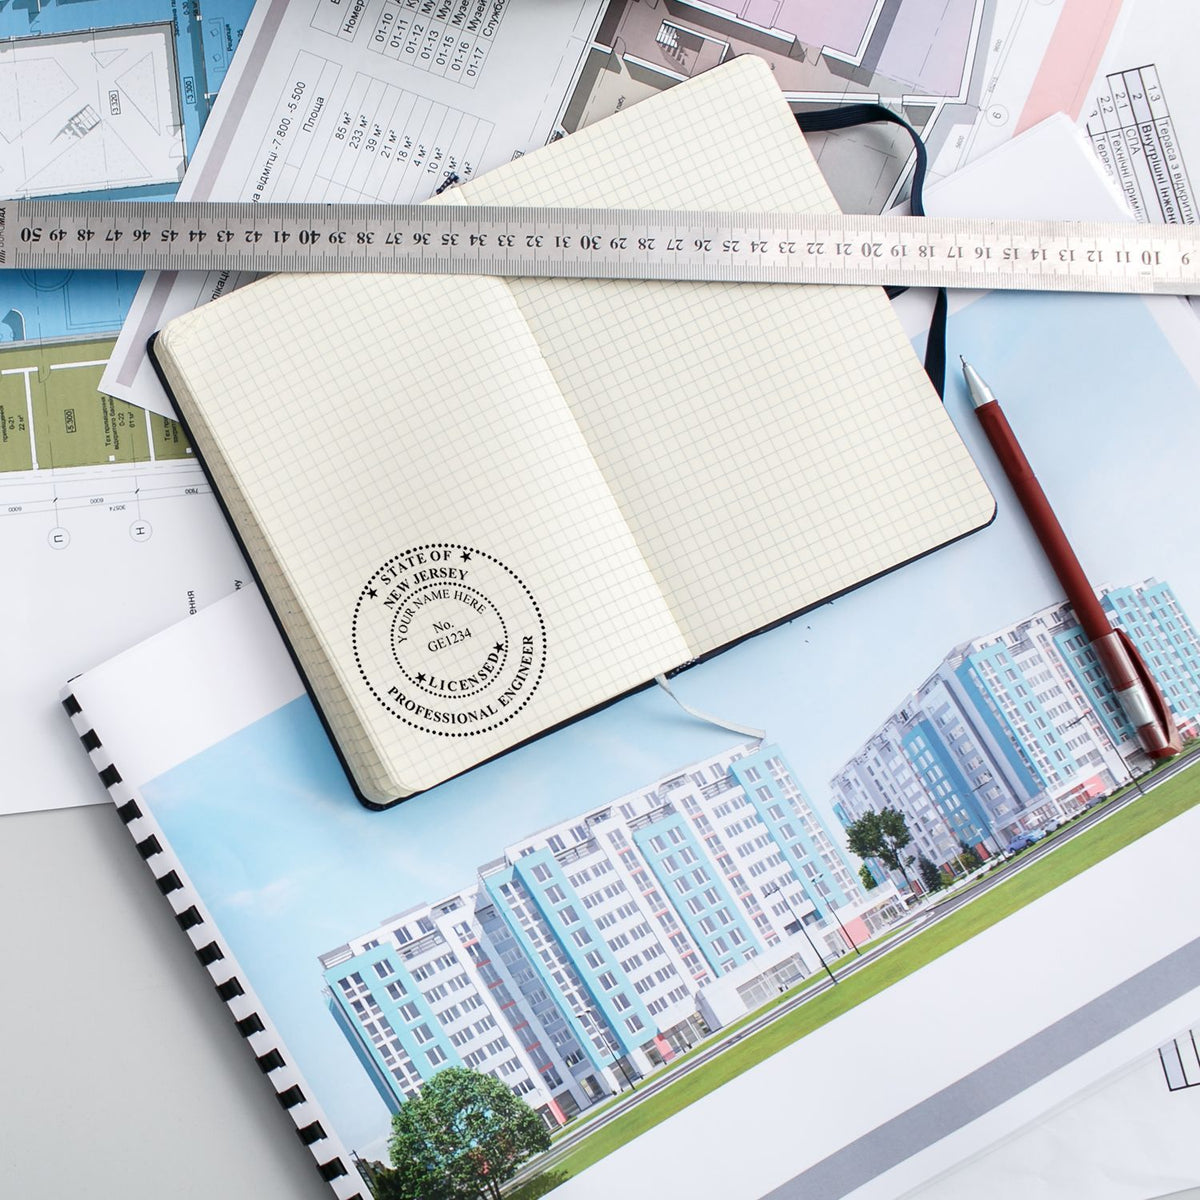 A stamped impression of the New Jersey Professional Engineer Seal Stamp in this stylish lifestyle photo, setting the tone for a unique and personalized product.